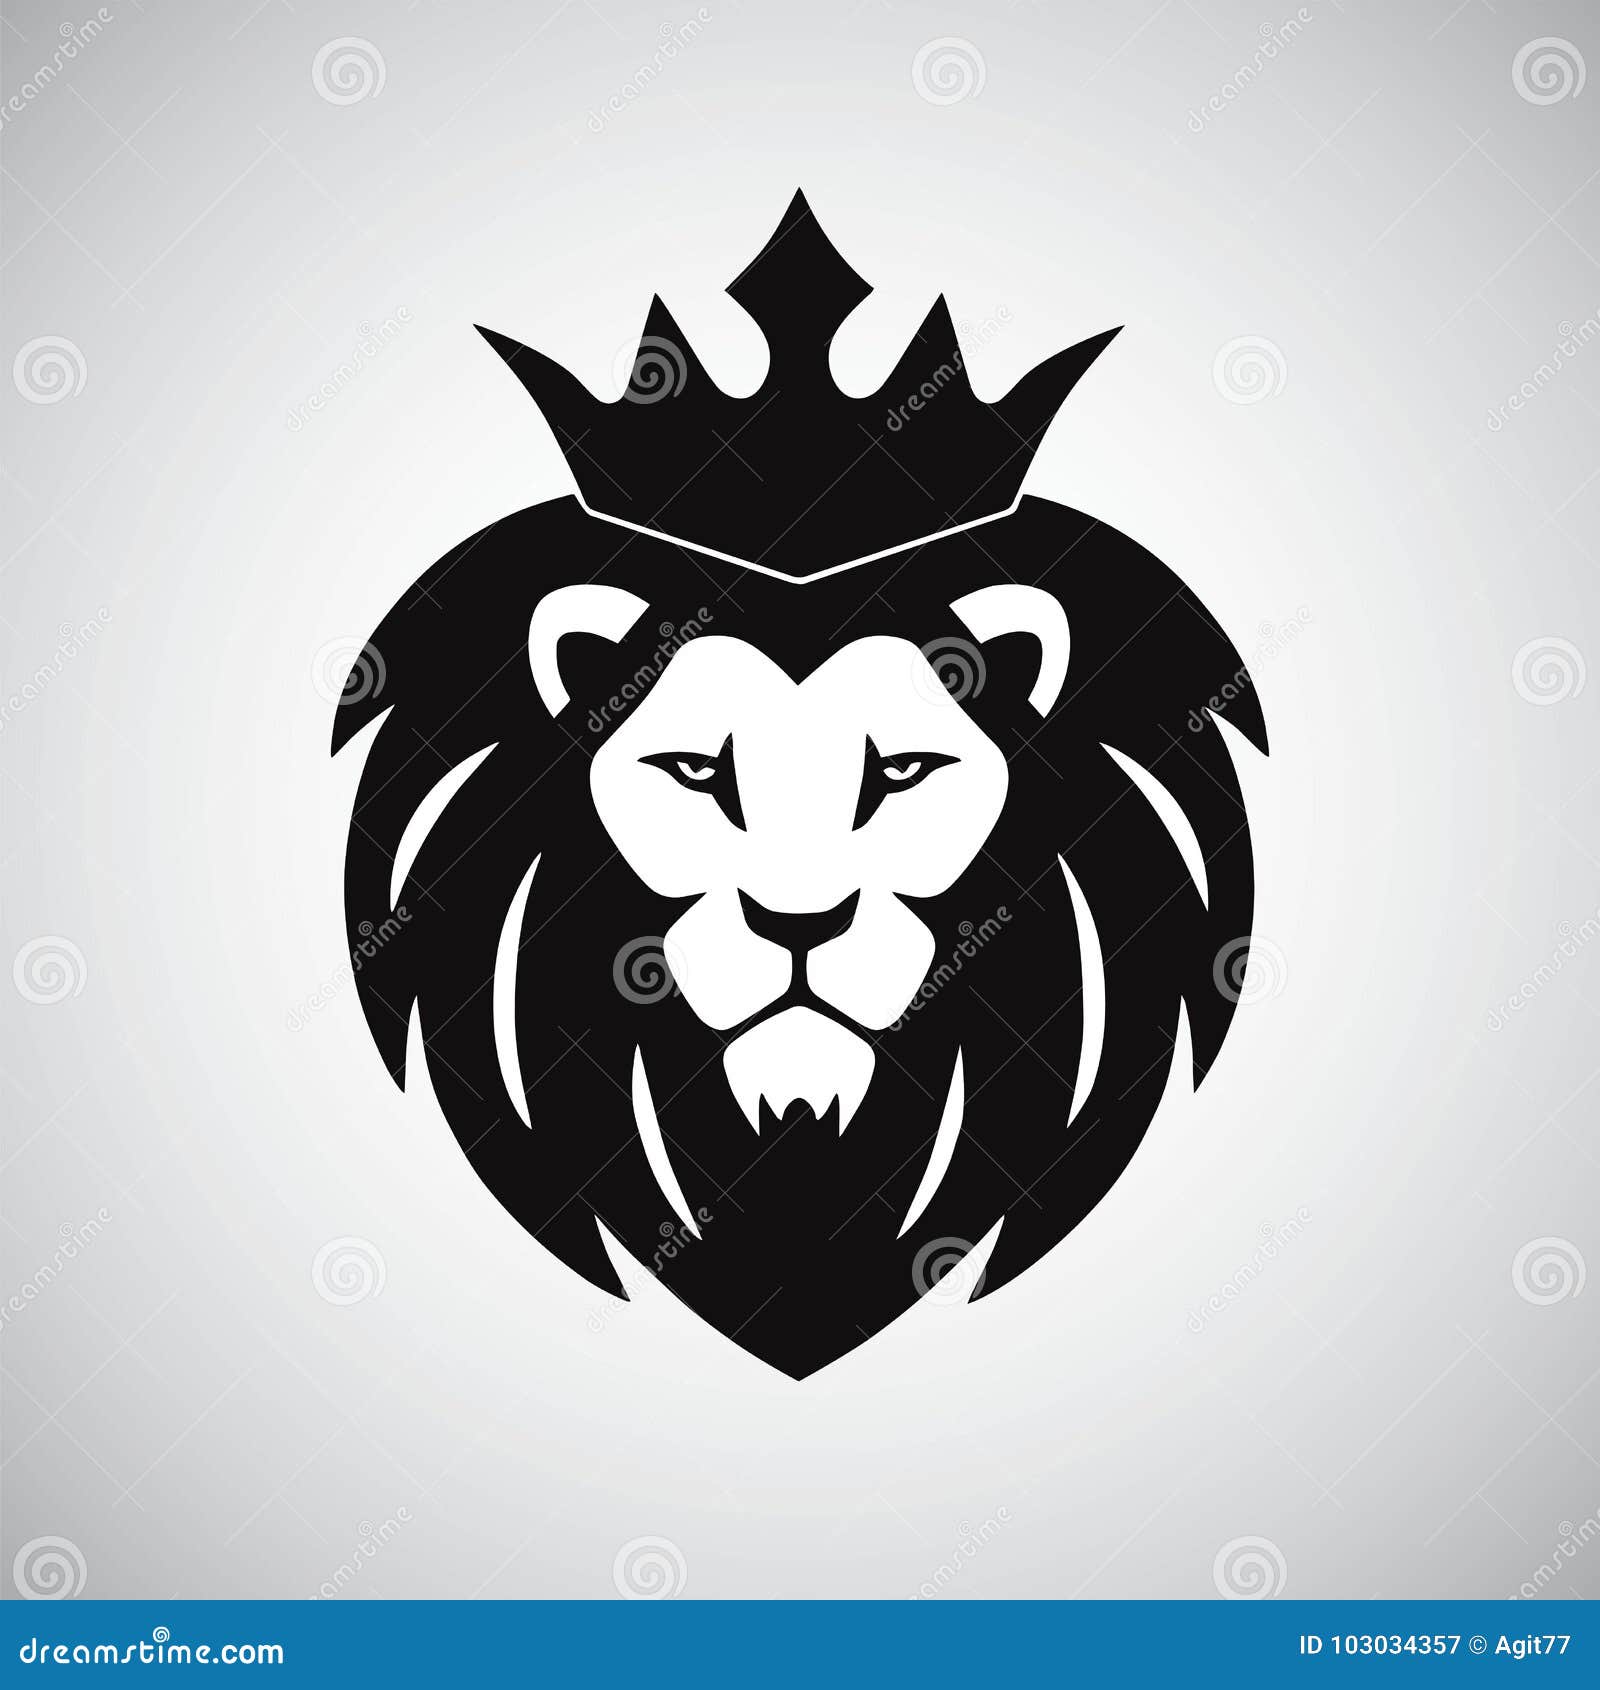 lion king with crown logo